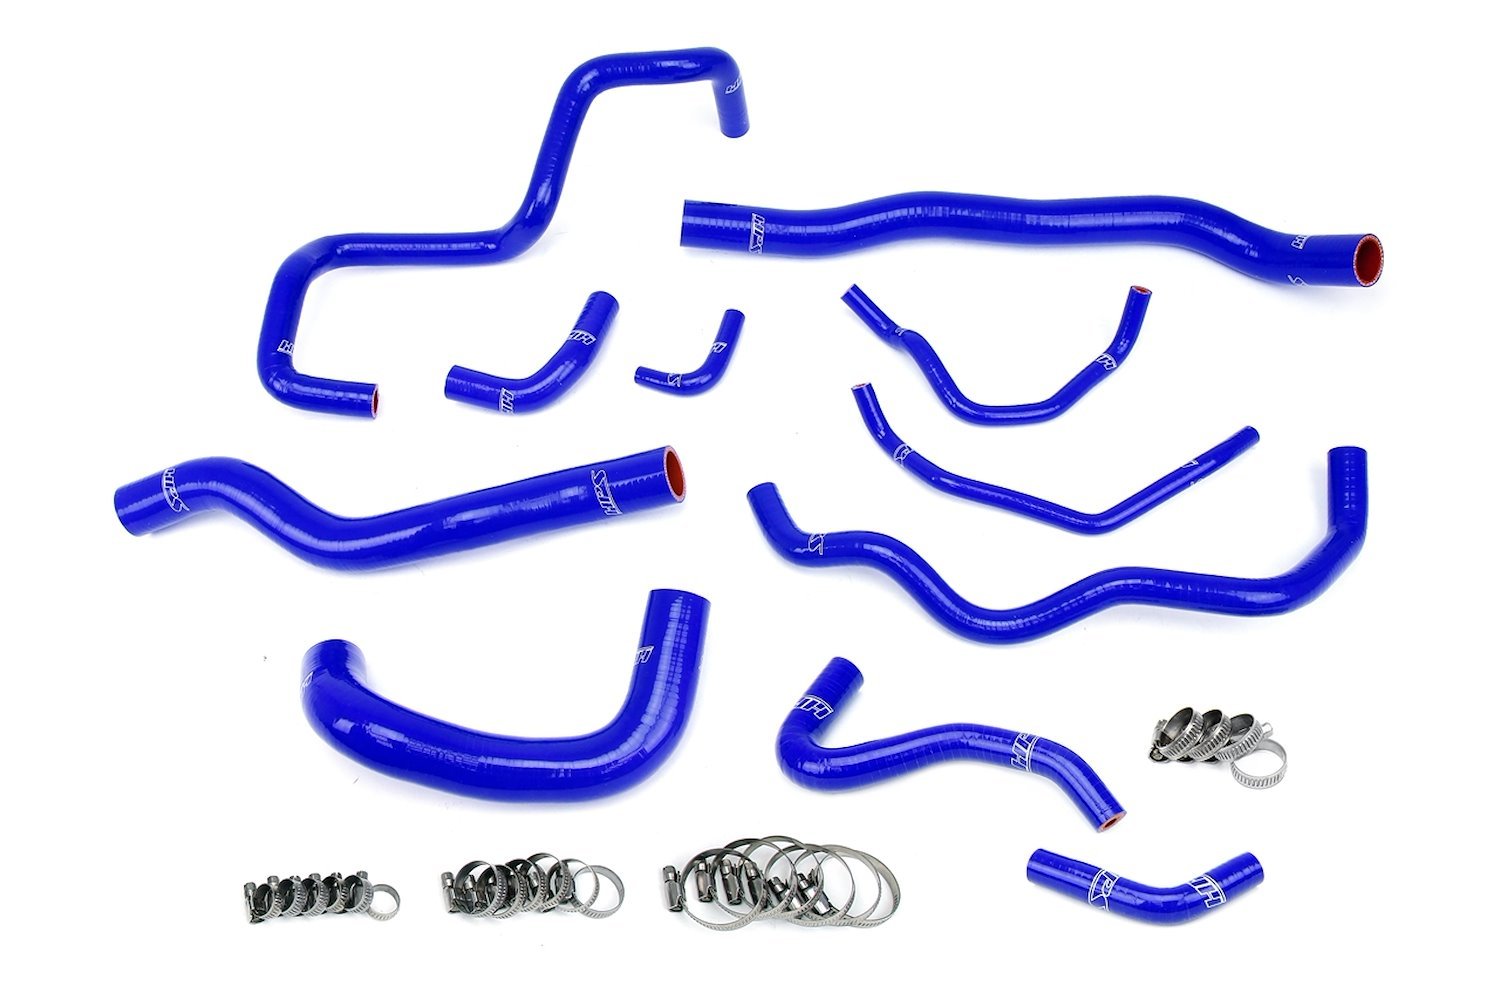 57-1876-BLUE Coolant Hose Kit, 3-Ply Reinforced Silicone, Replaces Rubber Coolant Hoses